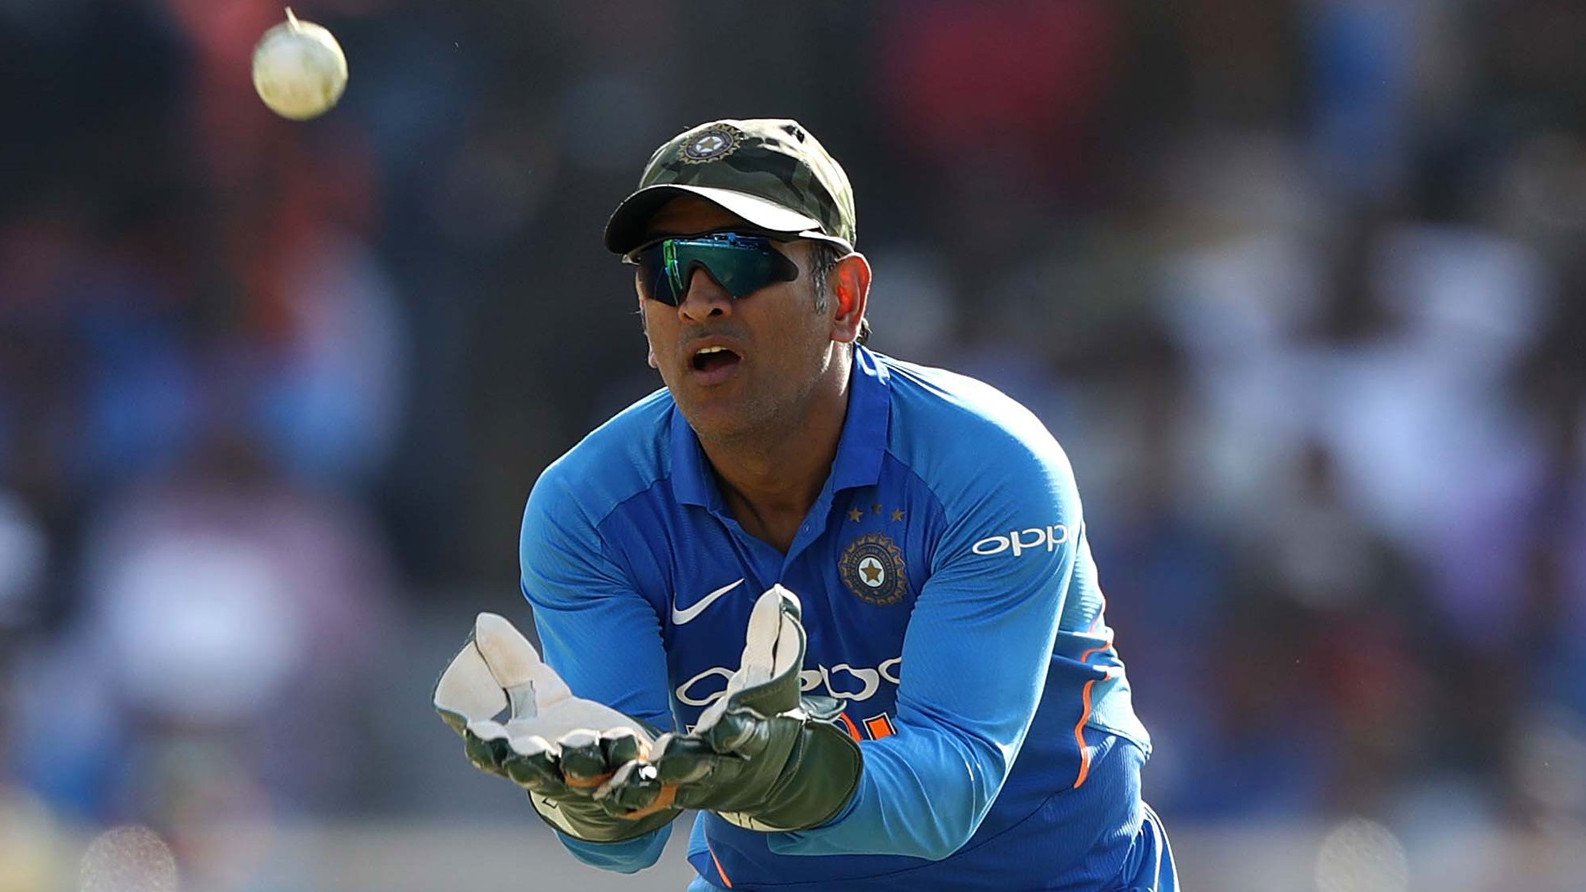 ‘Why do I need to receive the ball when I can snatch it?’- MS Dhoni on his unique wicketkeeping style